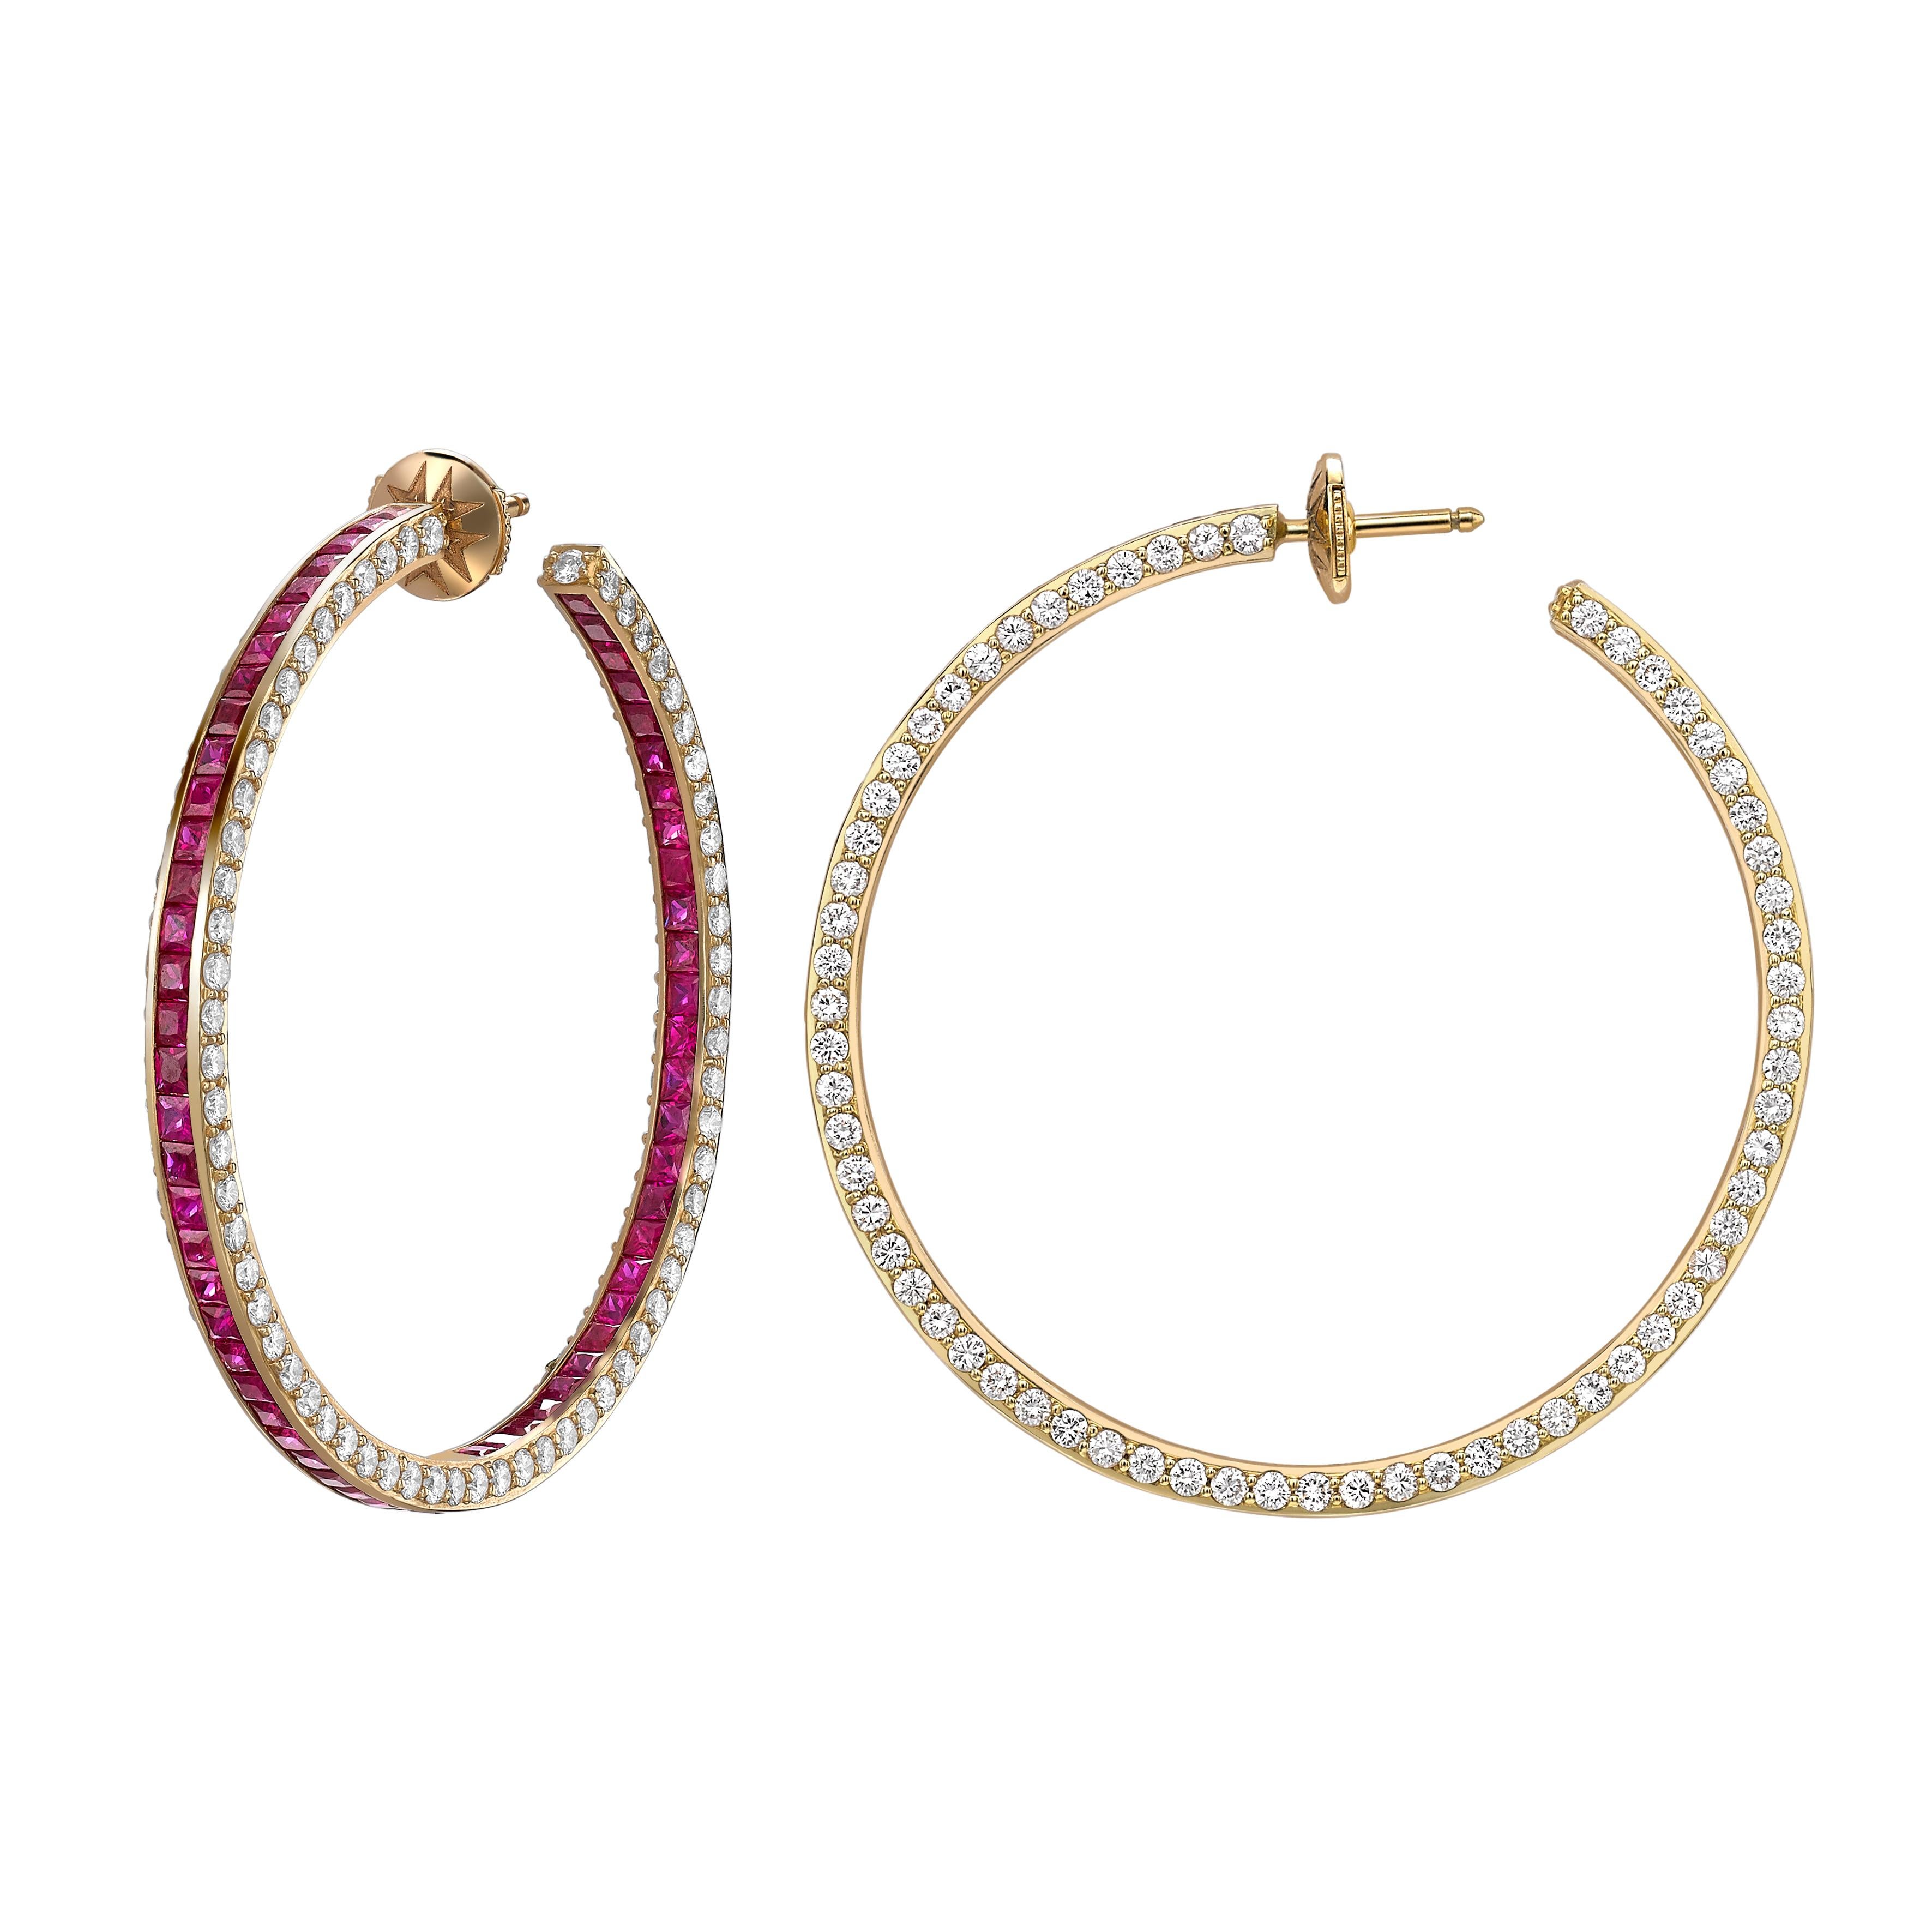 Add a touch of Sybarite spirit to your everyday essentials. This classic hoop silhouette is elevated by expert craftsmanship and precious stones, featuring a contrasting diamond and ruby design, making for an everyday basic that's anything